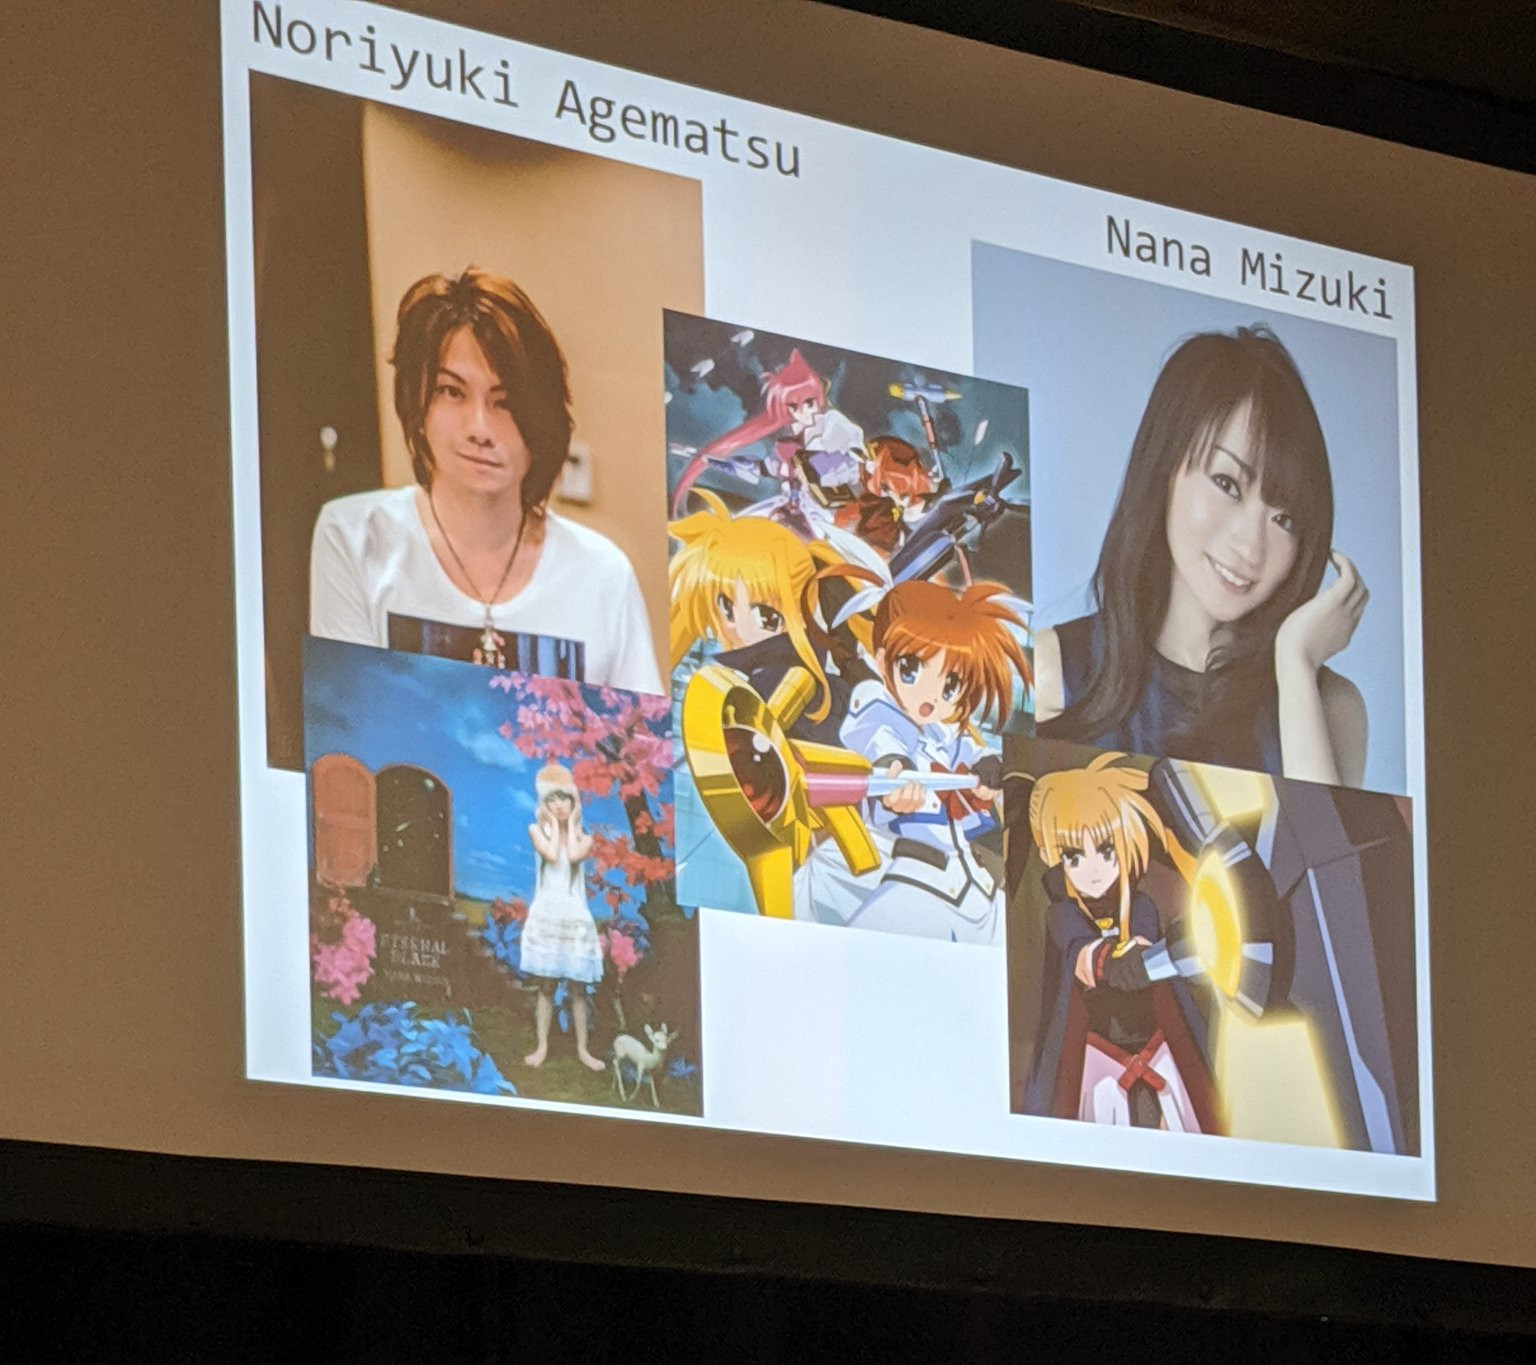 Panel Slide: It All Comes Full Circle